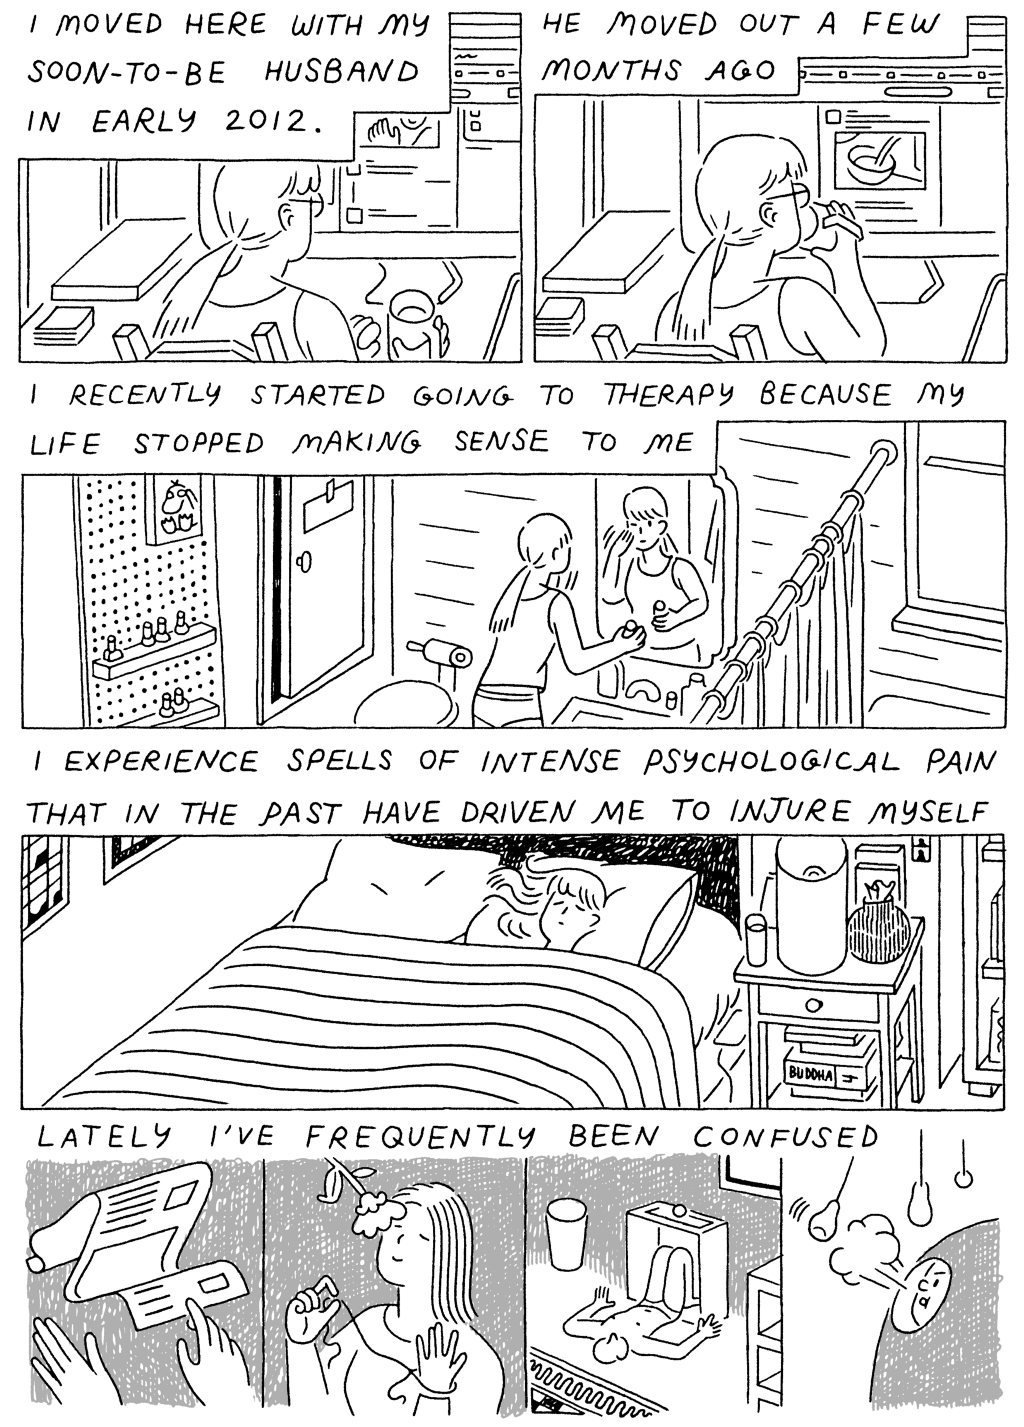 Panel 1: 
(Woman, scrolling through the internet.) I moved here with my soon-to-be husband in early 2012. 

He moved out a few months ago. 

Panel 2: 
(Woman, washing her face in a small bathroom) I recently started going to therapy because my life stopped making sense to me. 

Panel 3: 
(Woman, sleeping in a small bedroom) I experience spells of intense psychological pain that in the past have driven me to injure myself. 

Panel 4: 
(Woman, doing a series of strange things.) Lately, I've been confused. 
